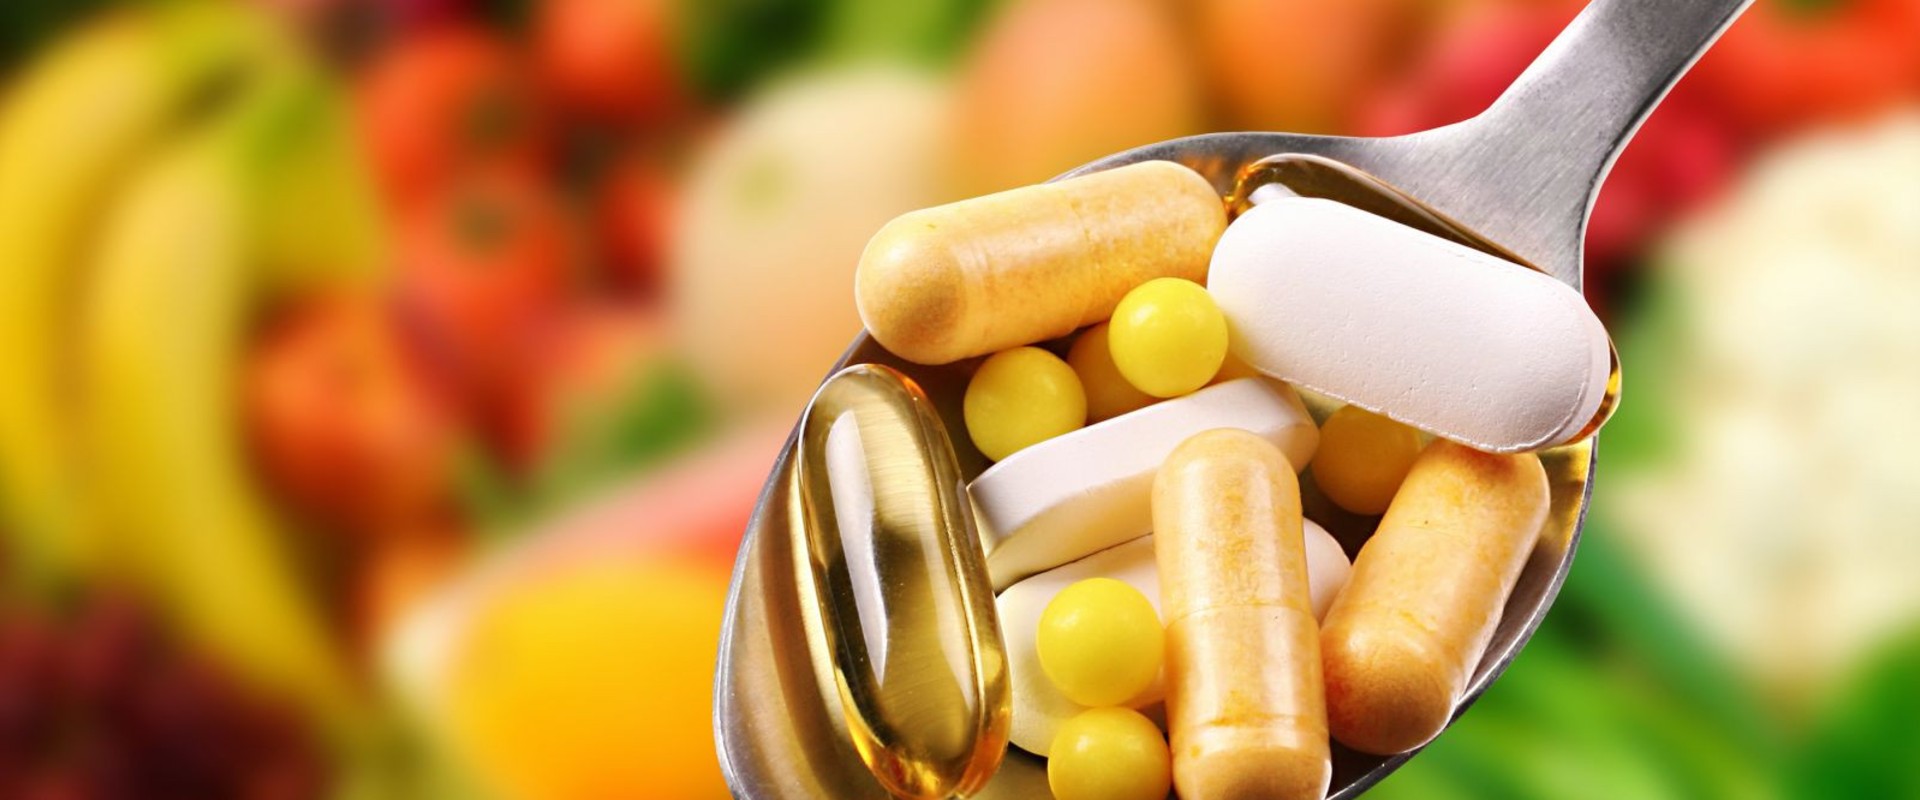 The Ultimate Guide to Taking Supplements: How and When to Take Vitamins for Optimal Health